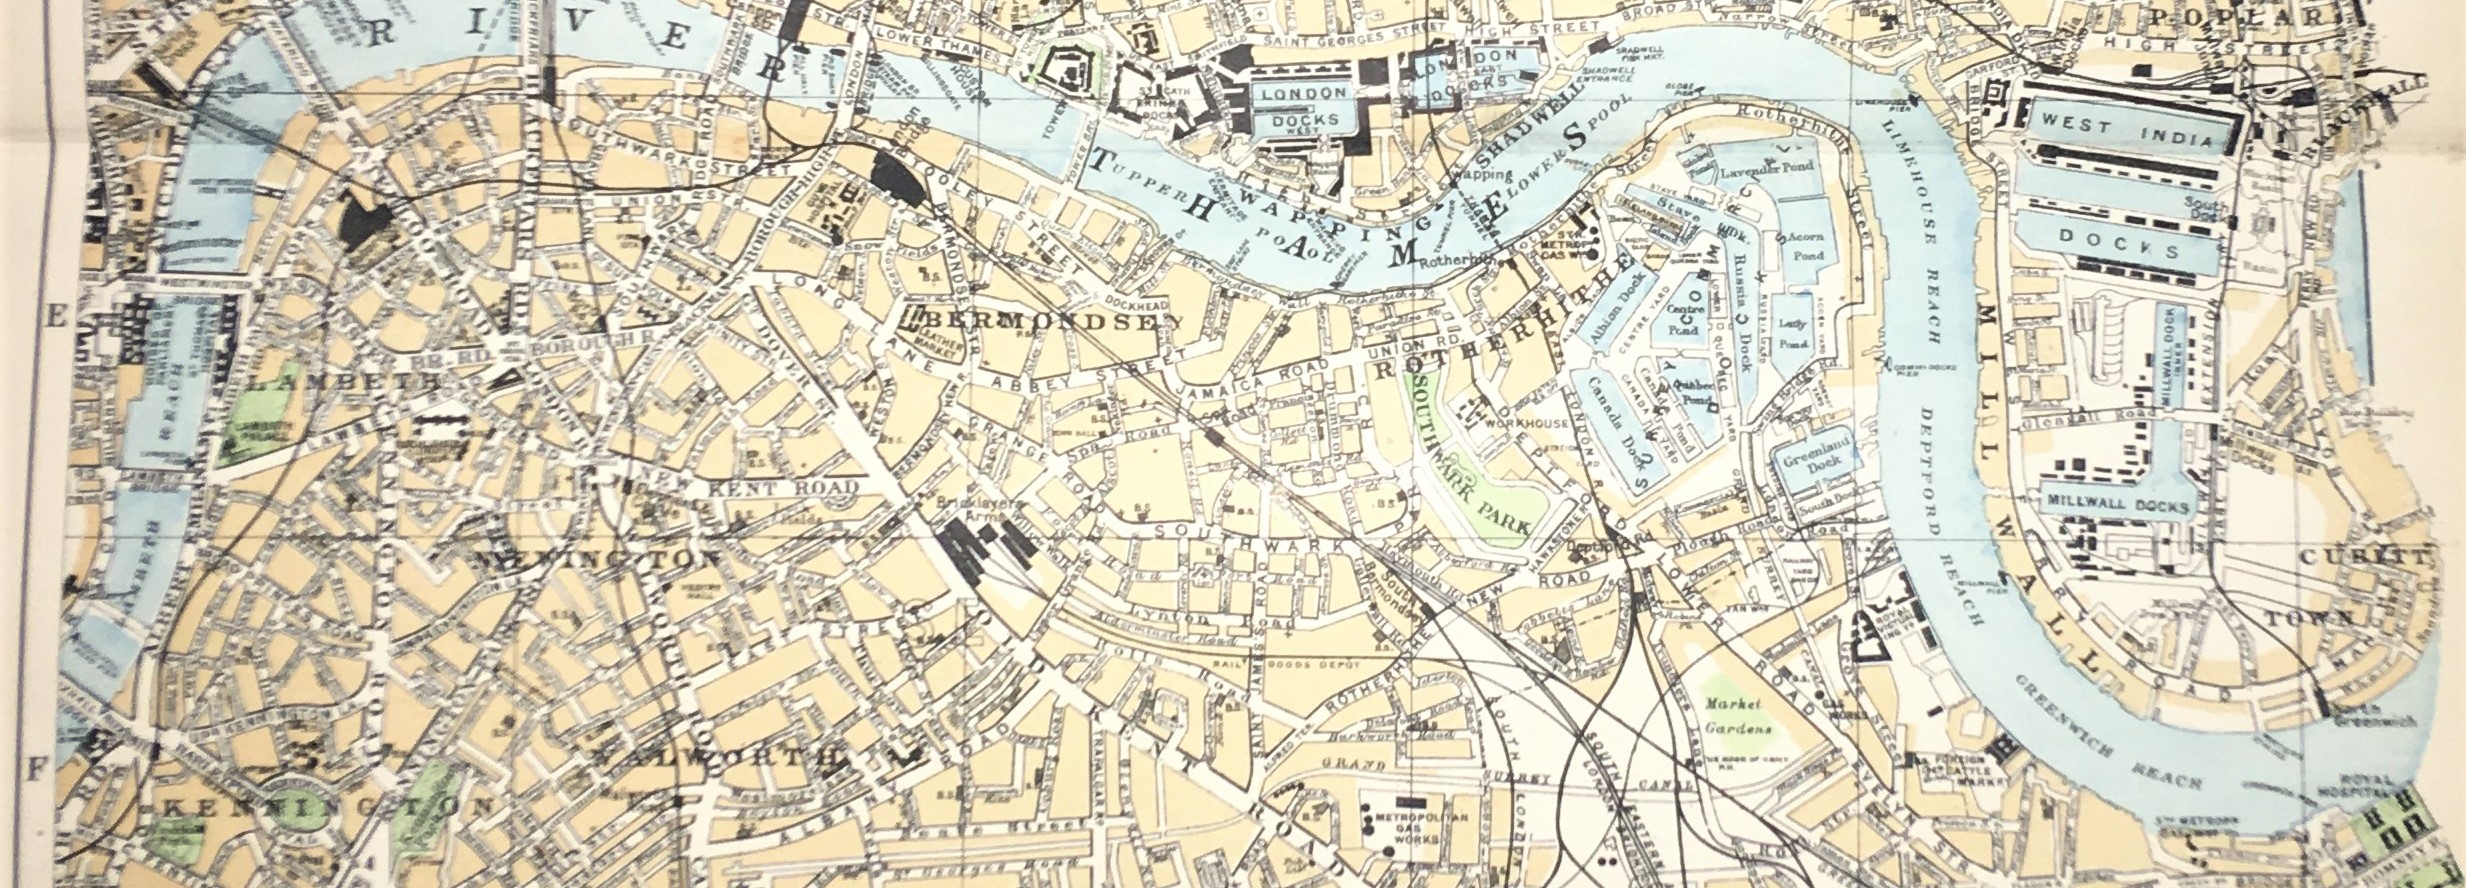 The East End Of London Large Victorian Streets Areas Map GW Bacon 1899. - Image 5 of 5